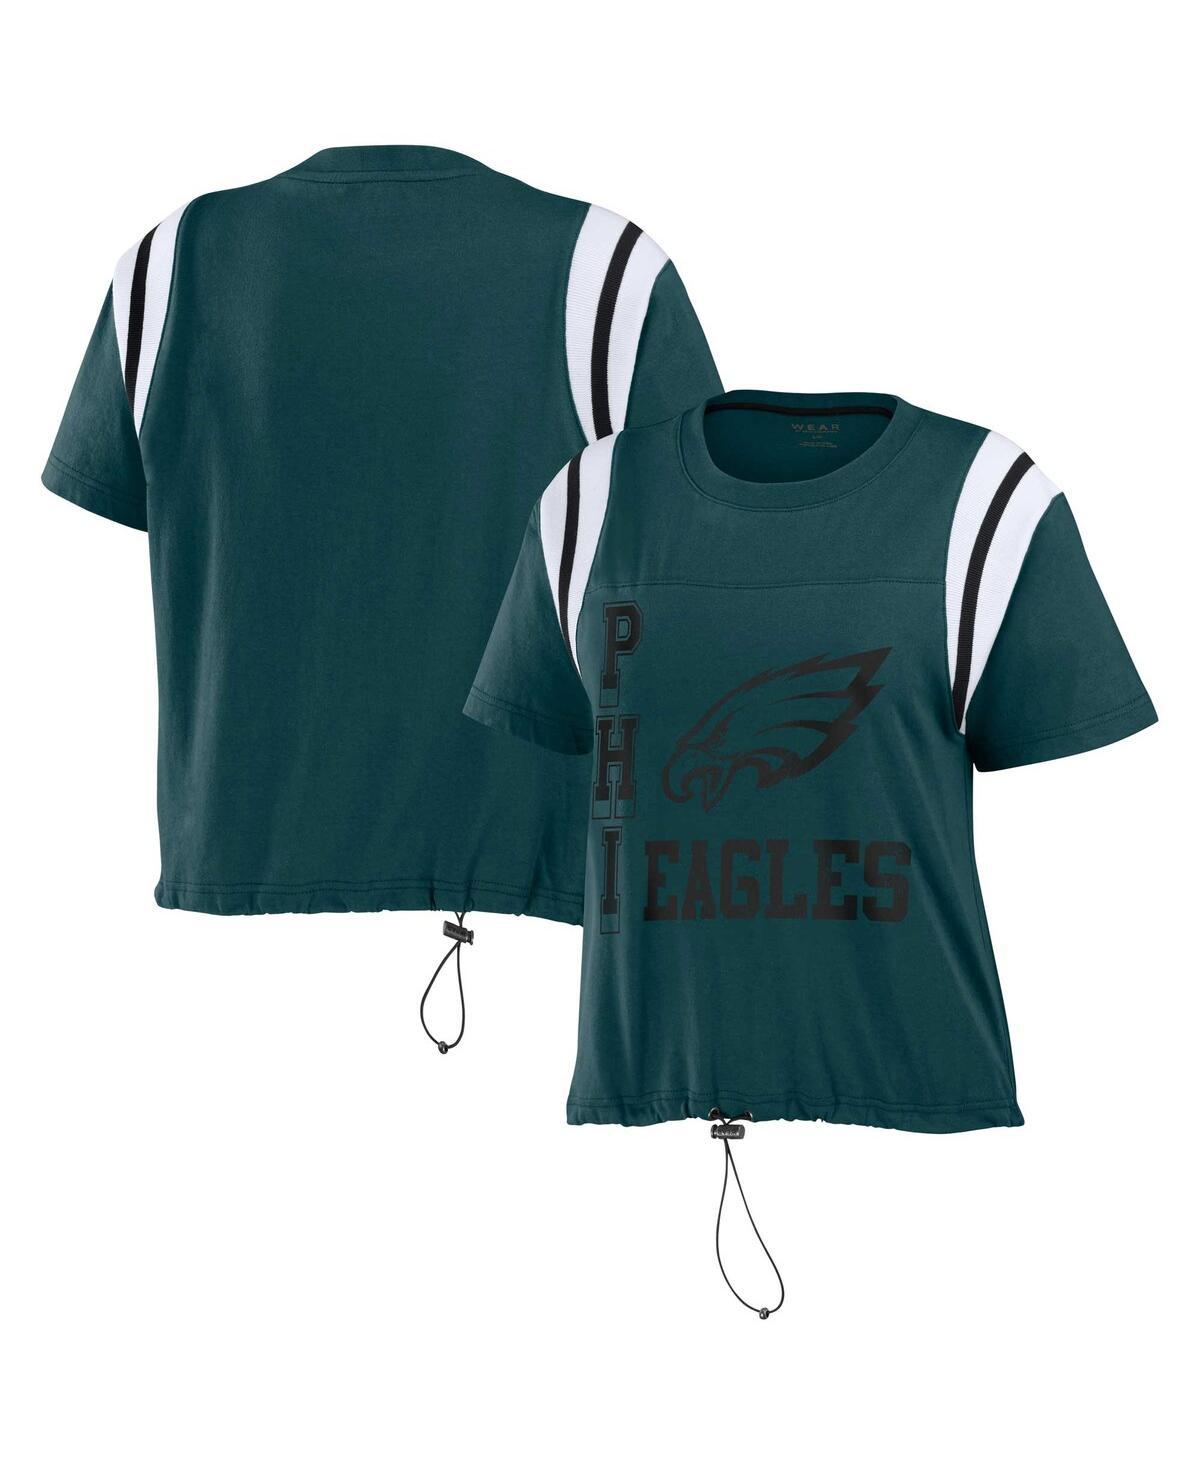 Shop Wear By Erin Andrews Women's  Midnight Green Distressed Philadelphia Eagles Cinched Colorblock T-shir